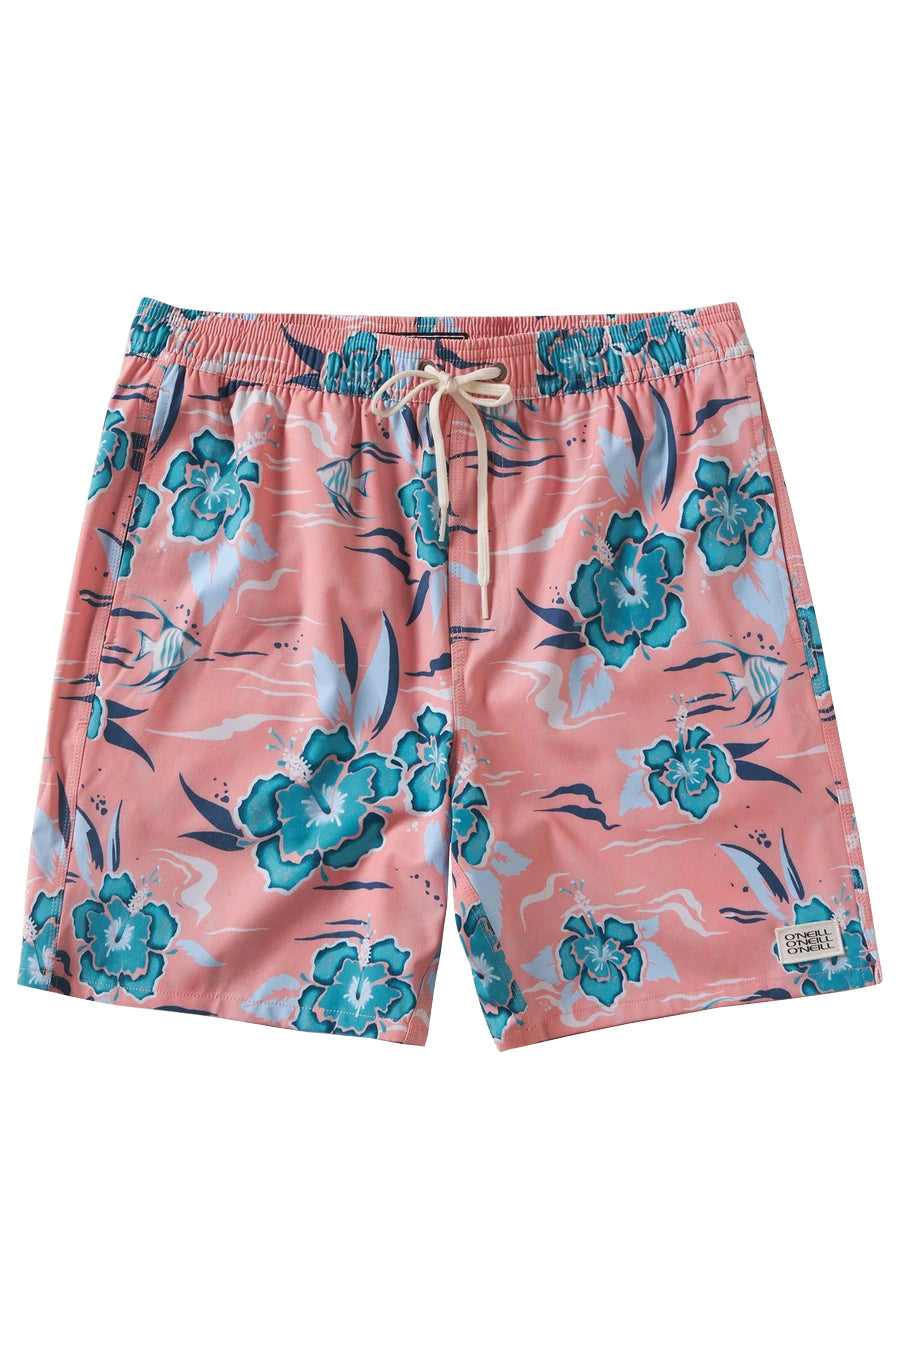 O'neill Mixed Up 17" Volley Boardshorts LCO-Light Coral M